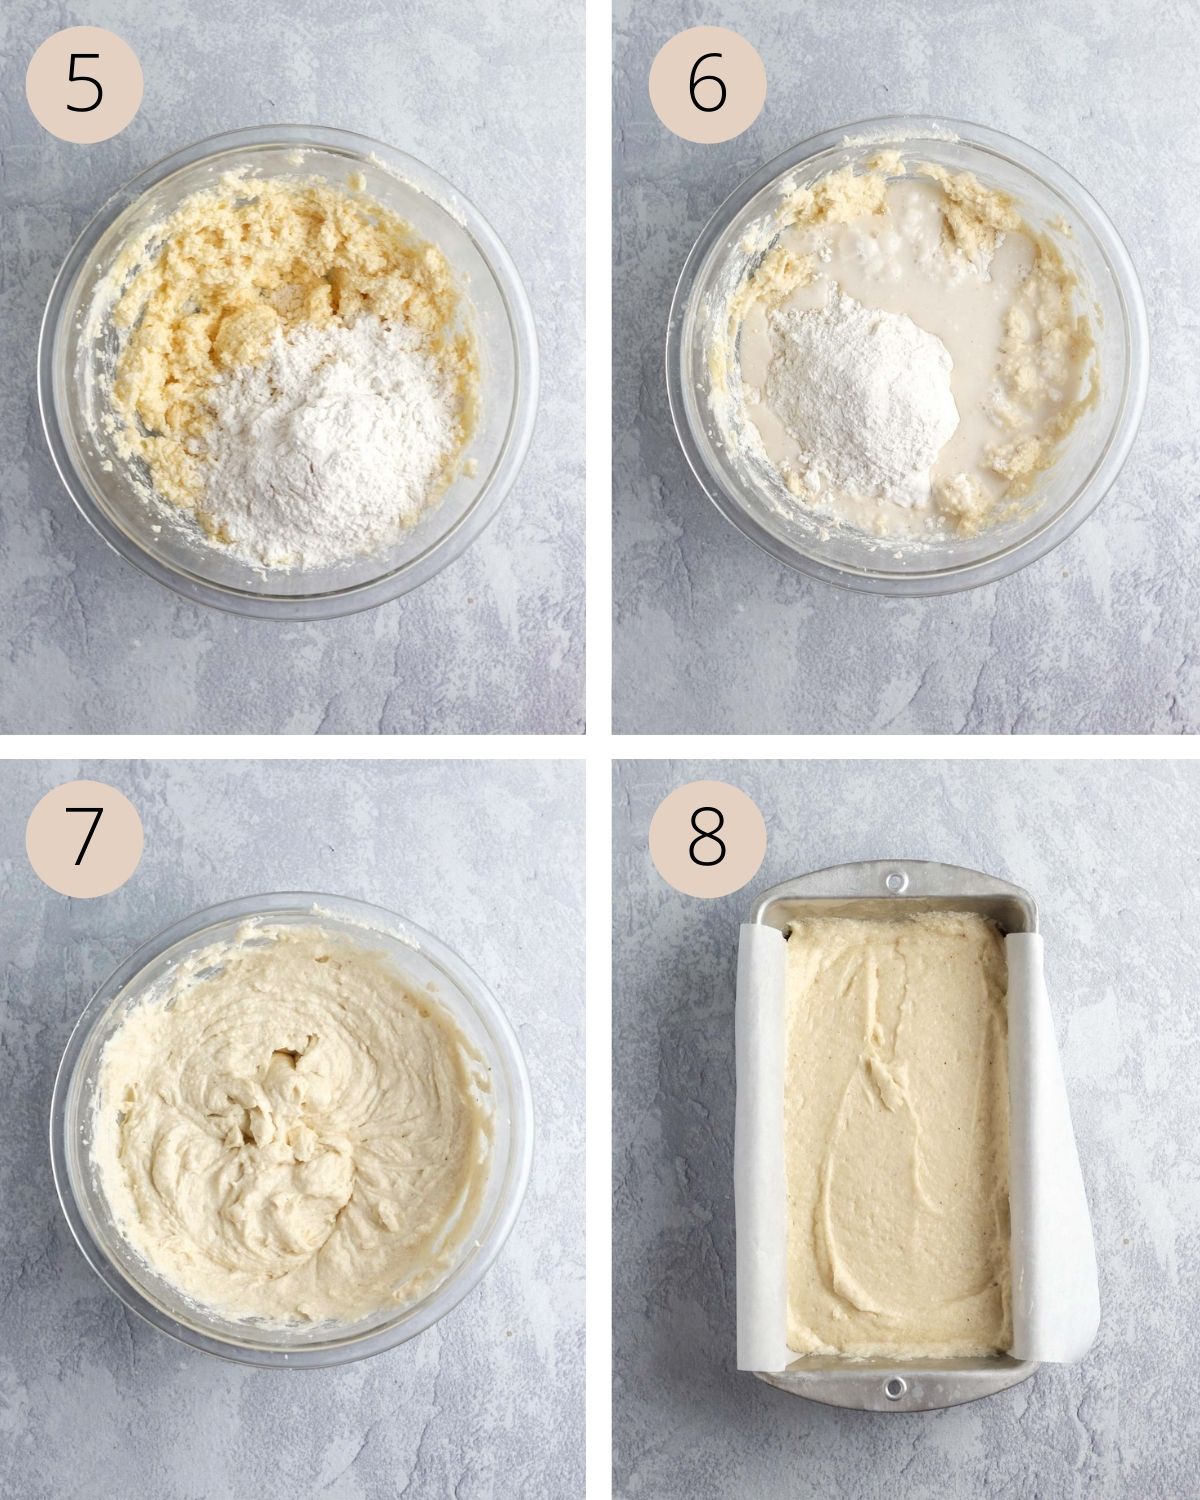 a collage of four images demonstrating how to add the flour, plant milk, and mix the pound cake batter. Then transfer the batter to the loaf pan.